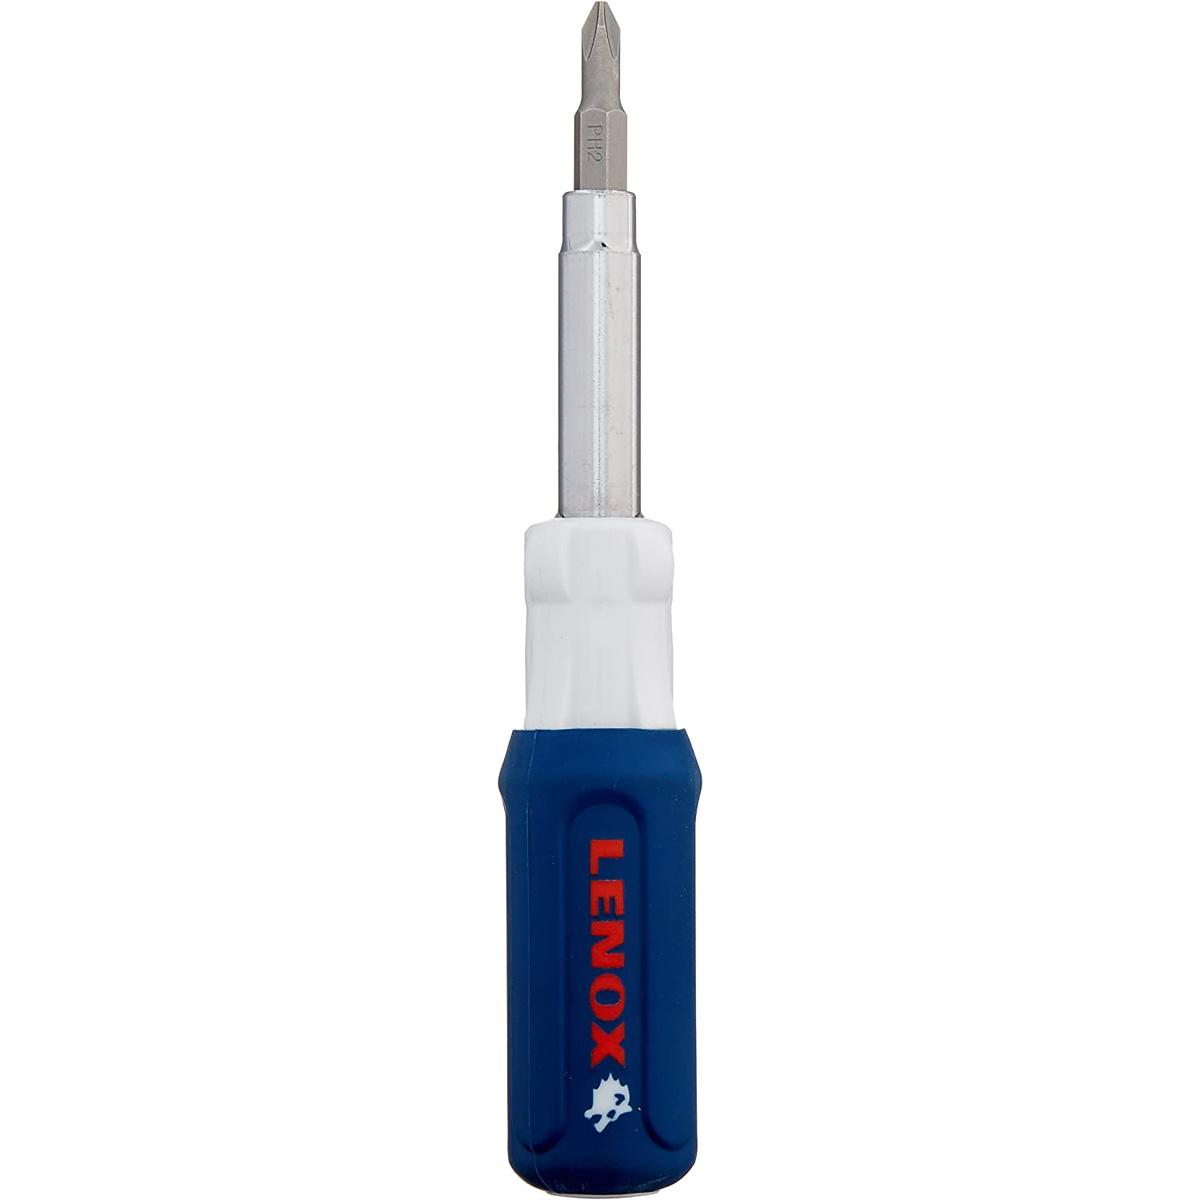 Lenox 9-in-1 Rubber Handle Assorted Multi-bit Screwdriver Set for $8.98 Shipped